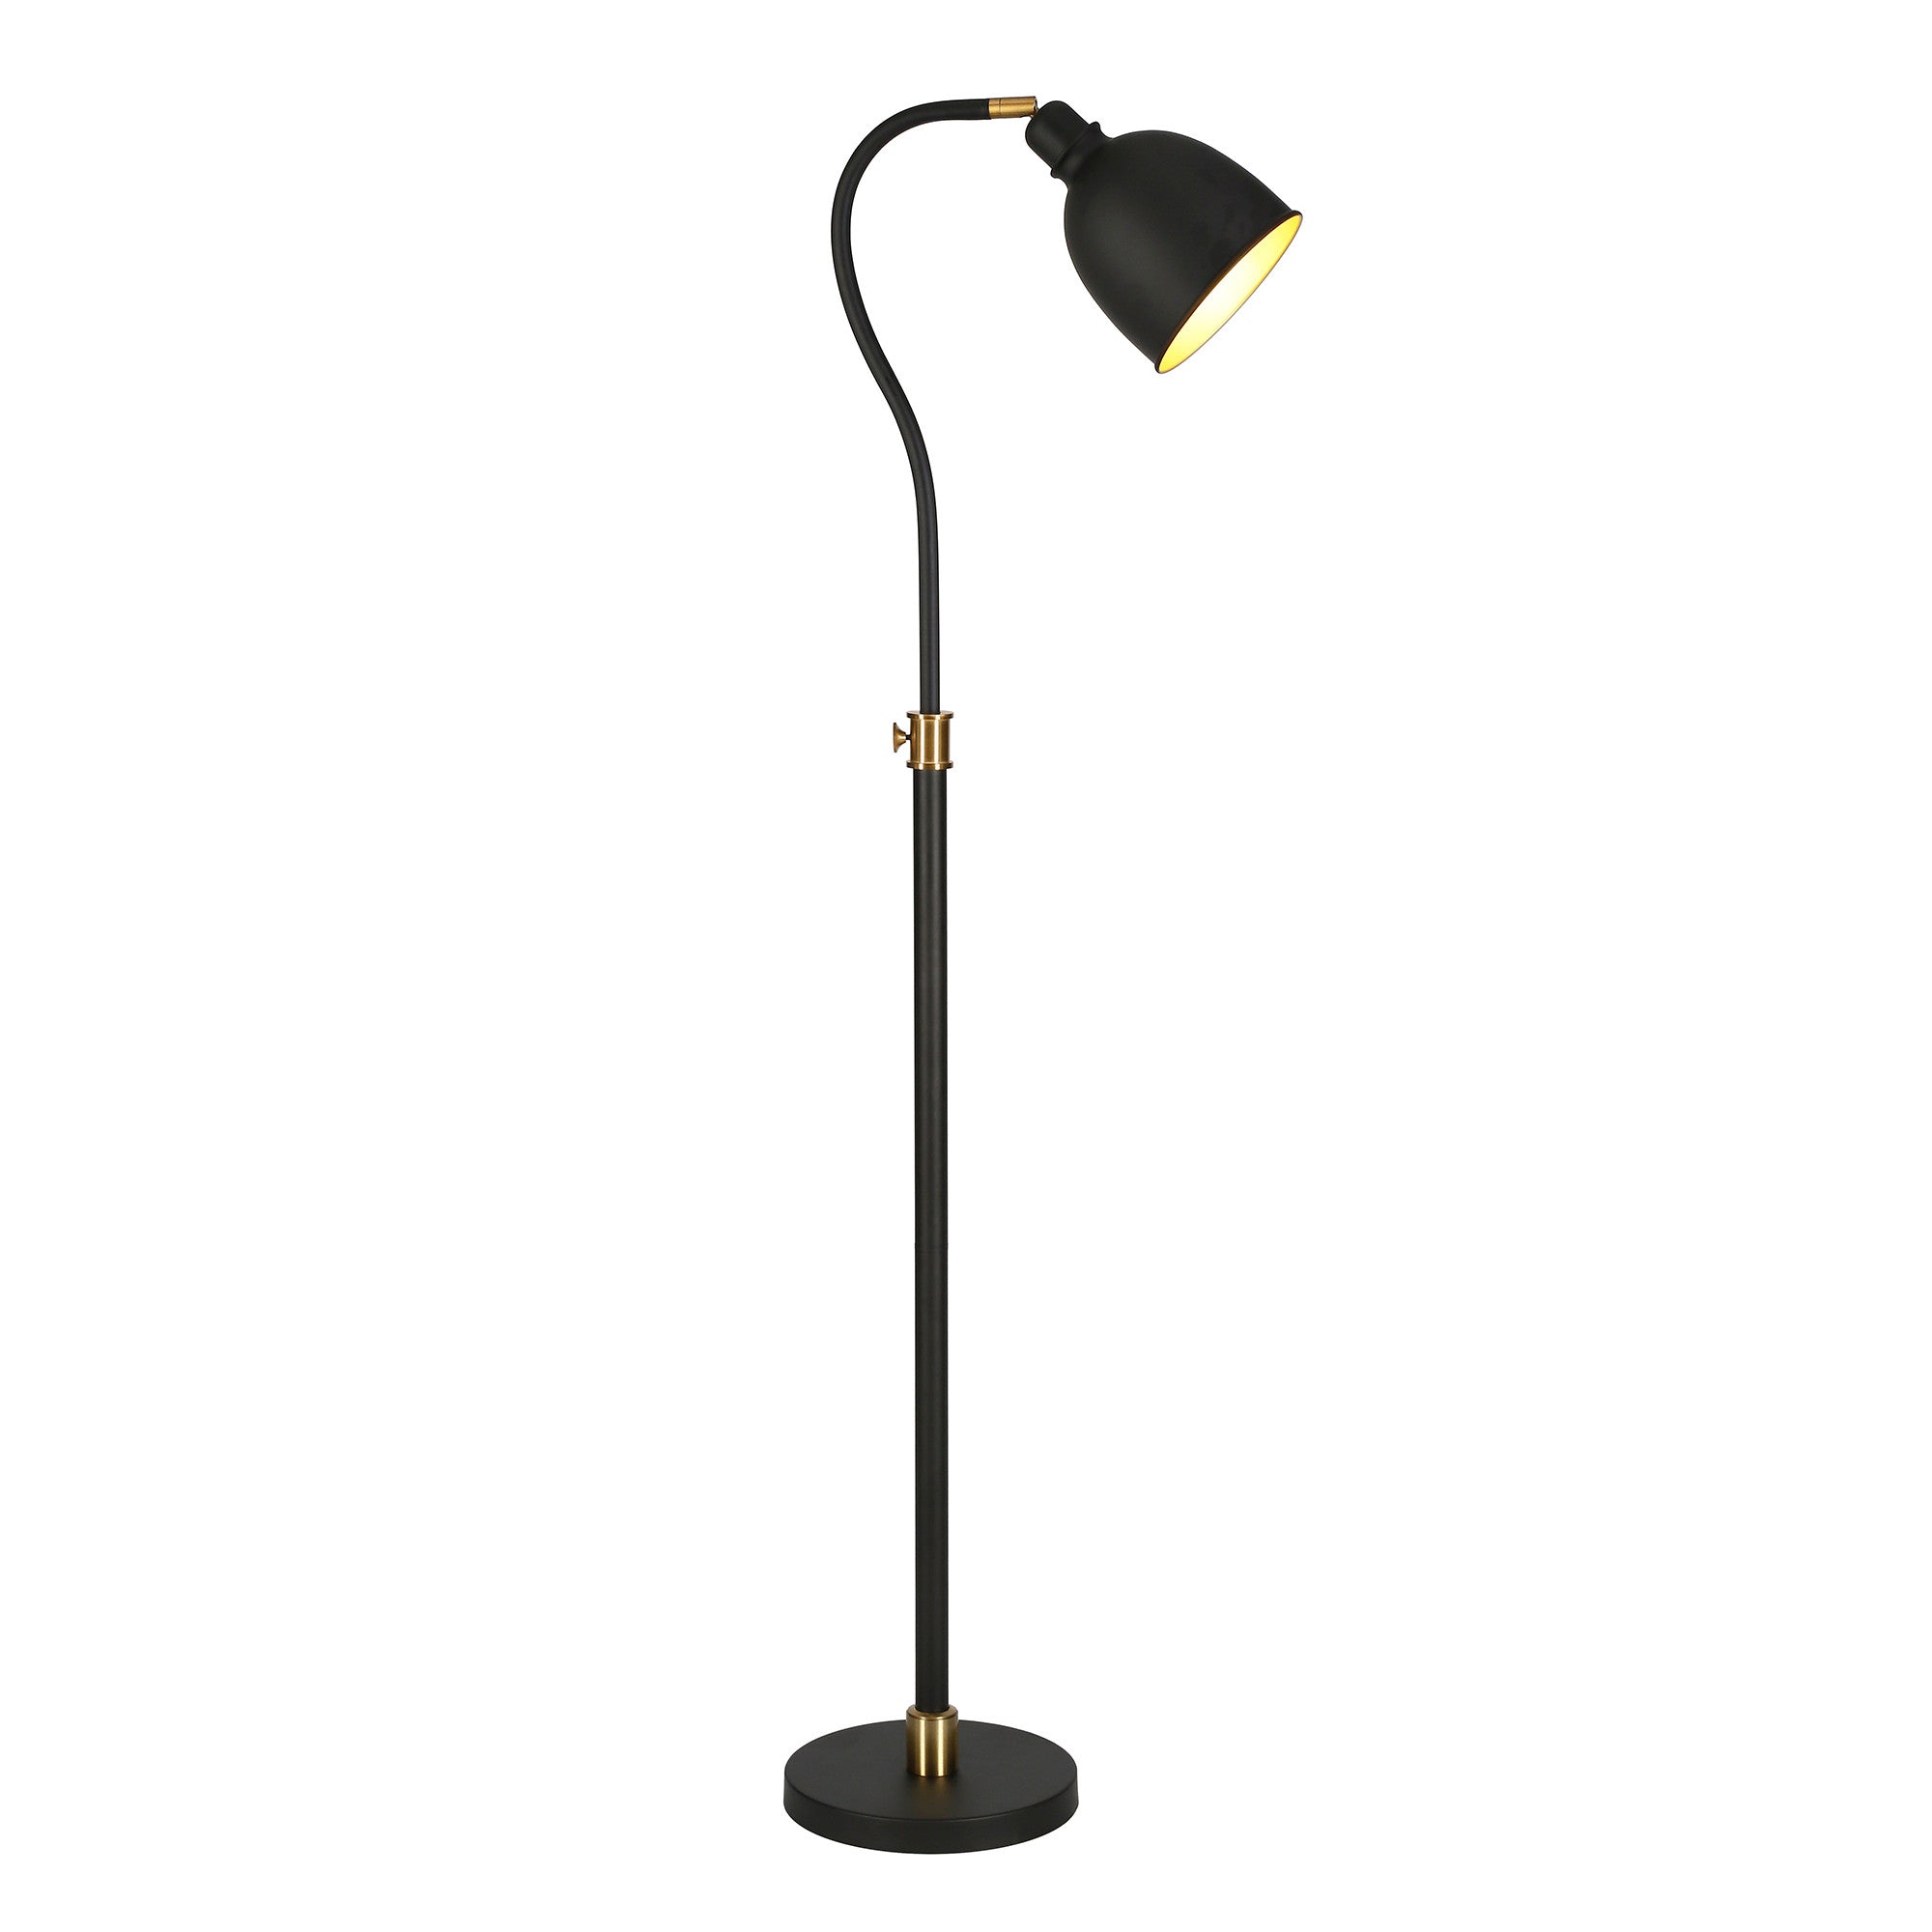 68" Black Adjustable Reading Floor Lamp With Black Dome Shade